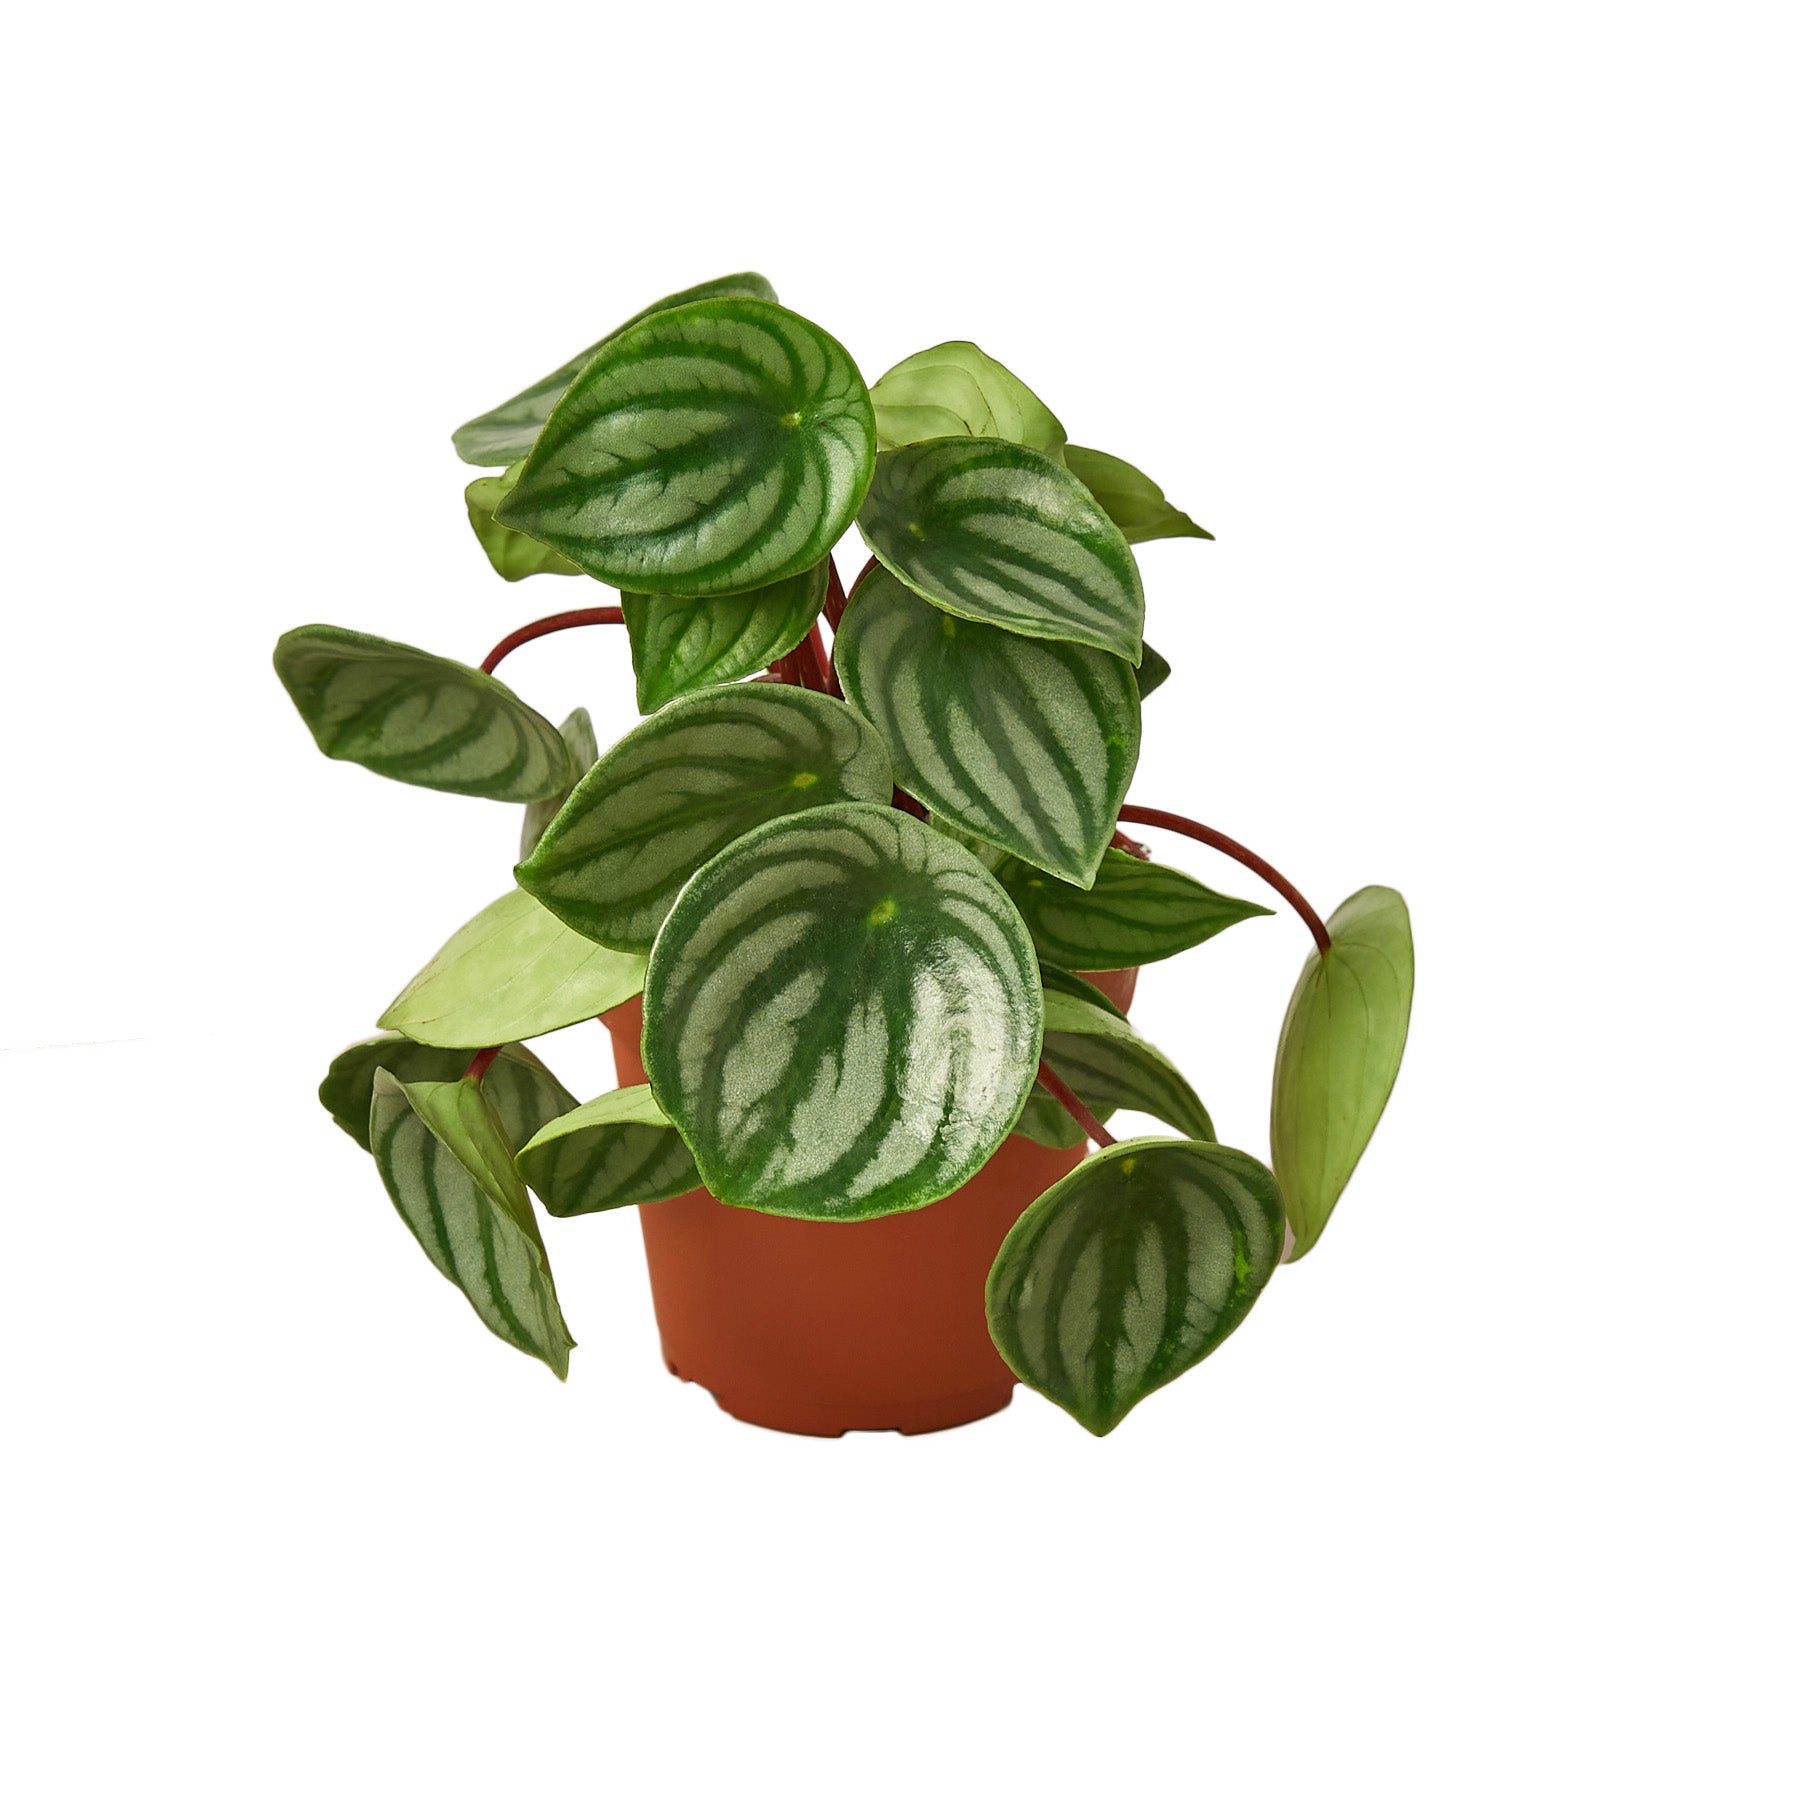 A plant with green and white leaves in a pot on a white background at a nearby nursery.